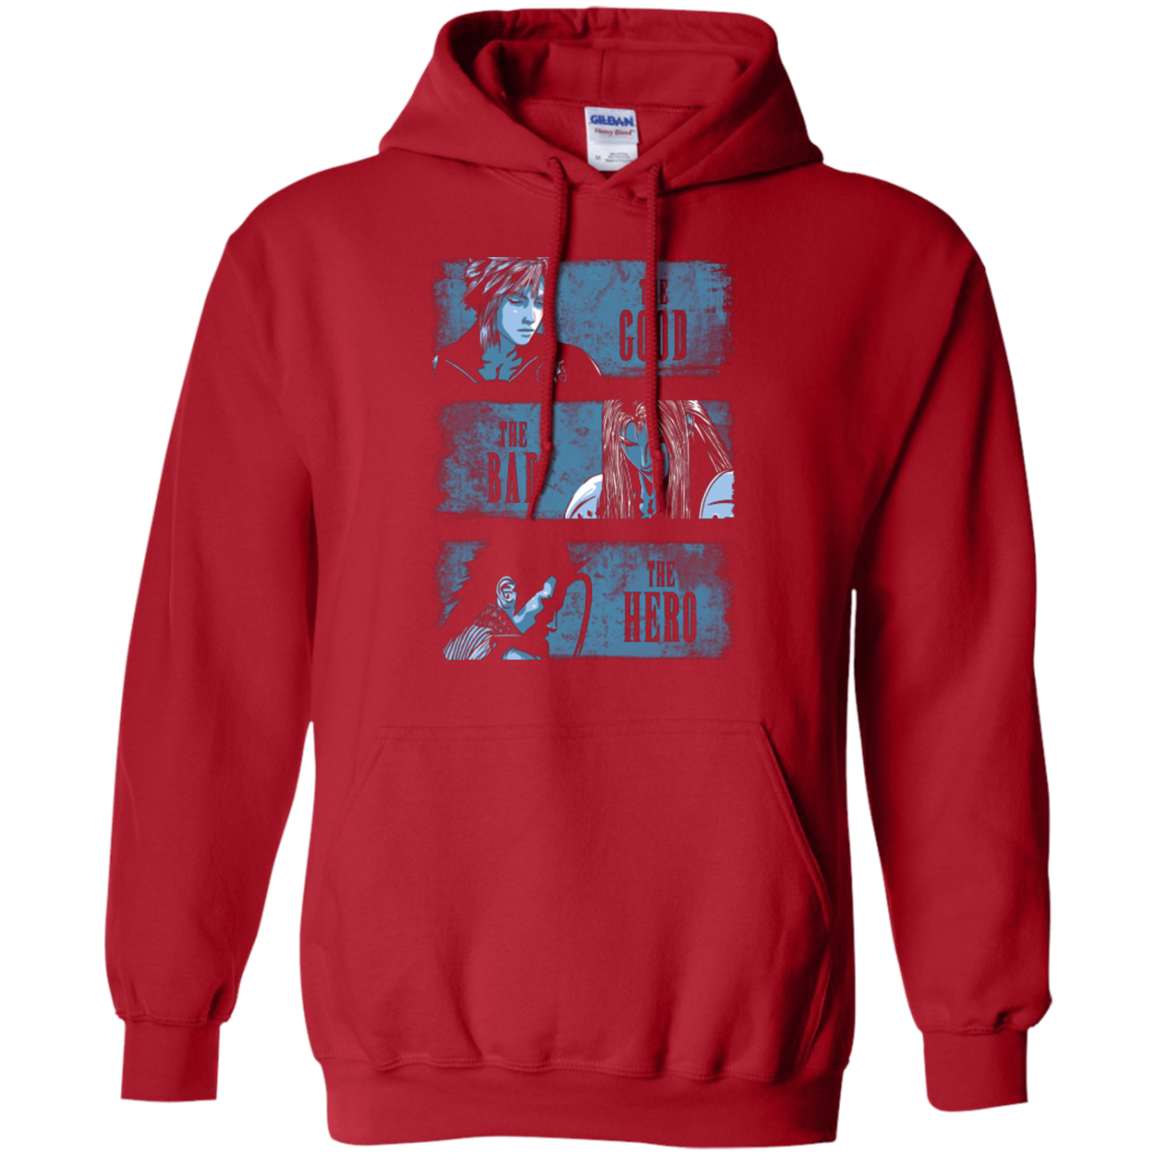 The Good the Bad and the Hero Pullover Hoodie